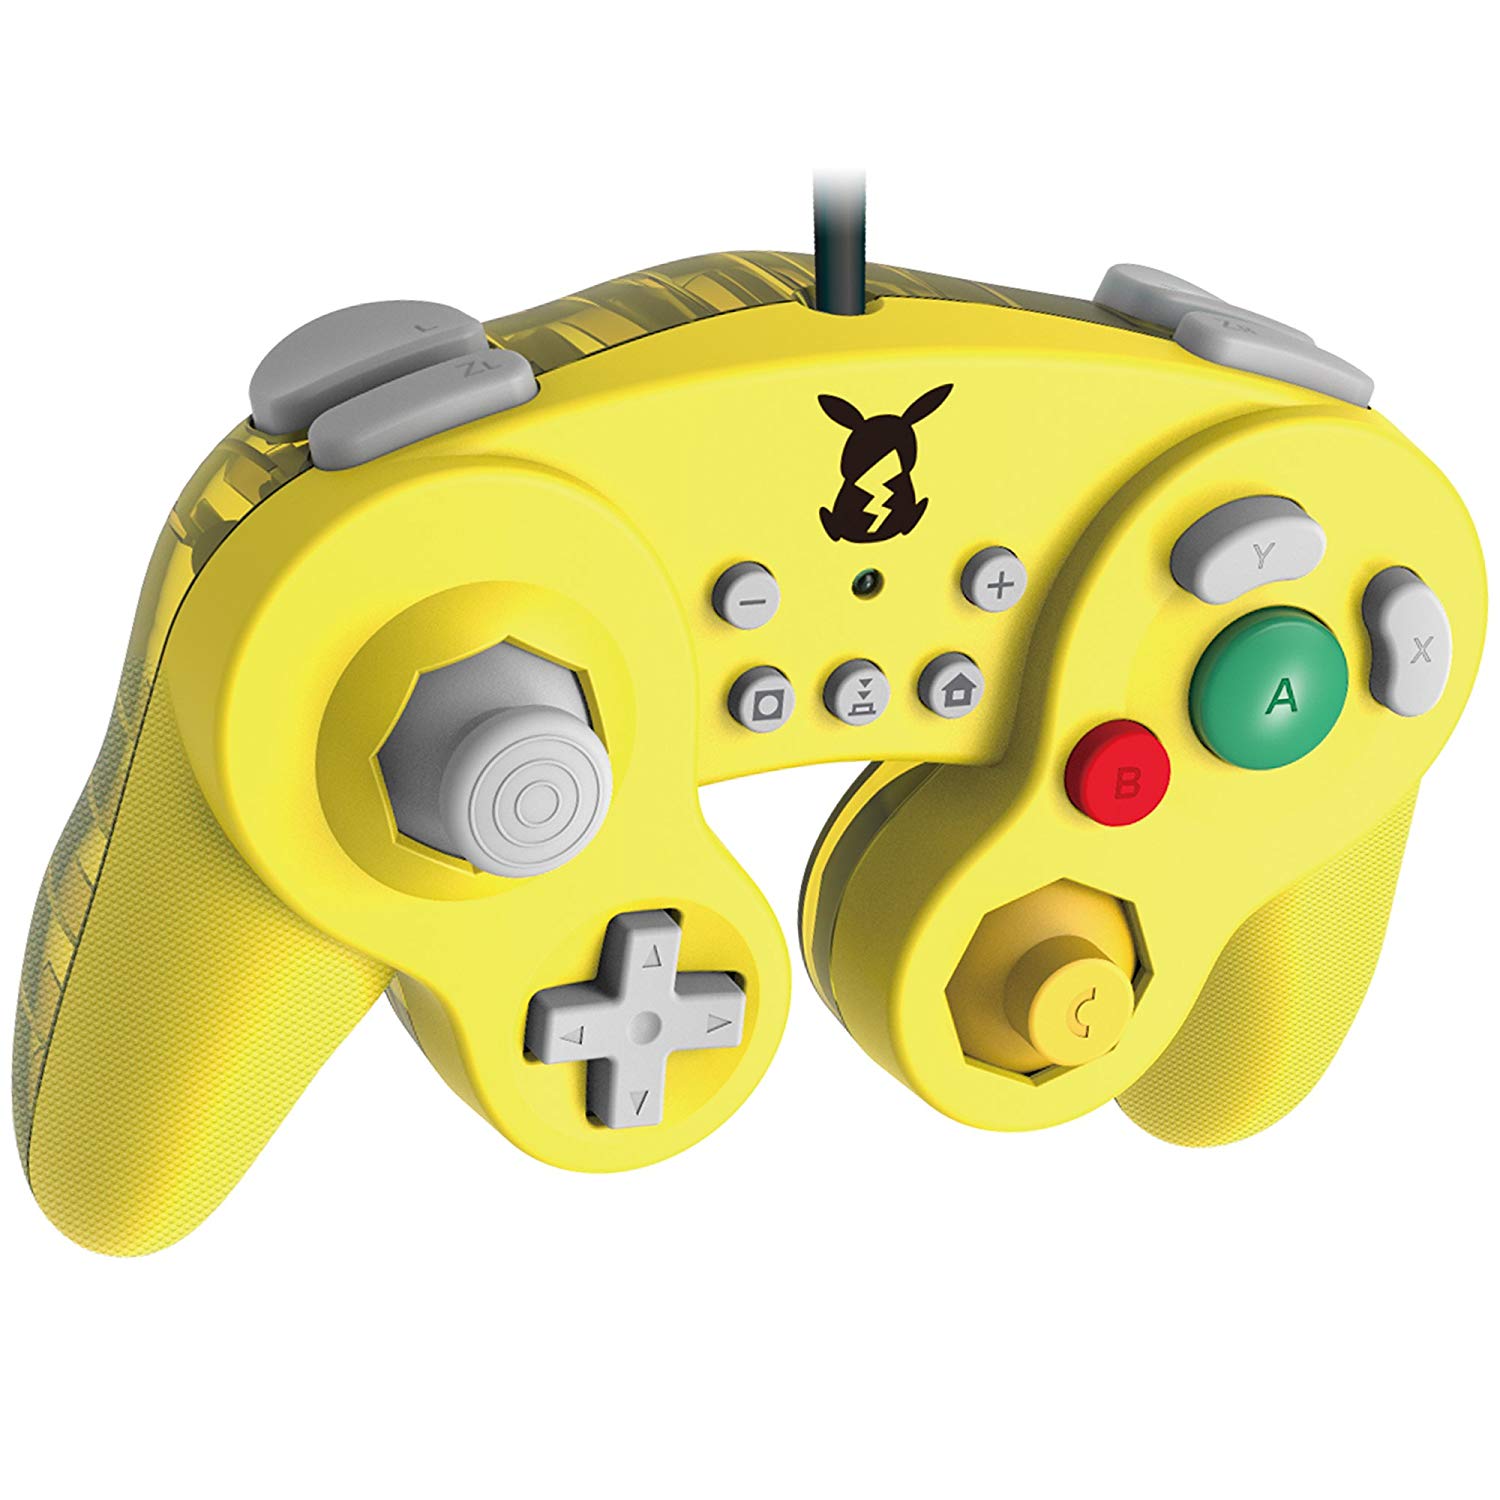 HORI Reveals Mario, Zelda, Switch GameCube Controllers NintendoSoup And Pikachu For –